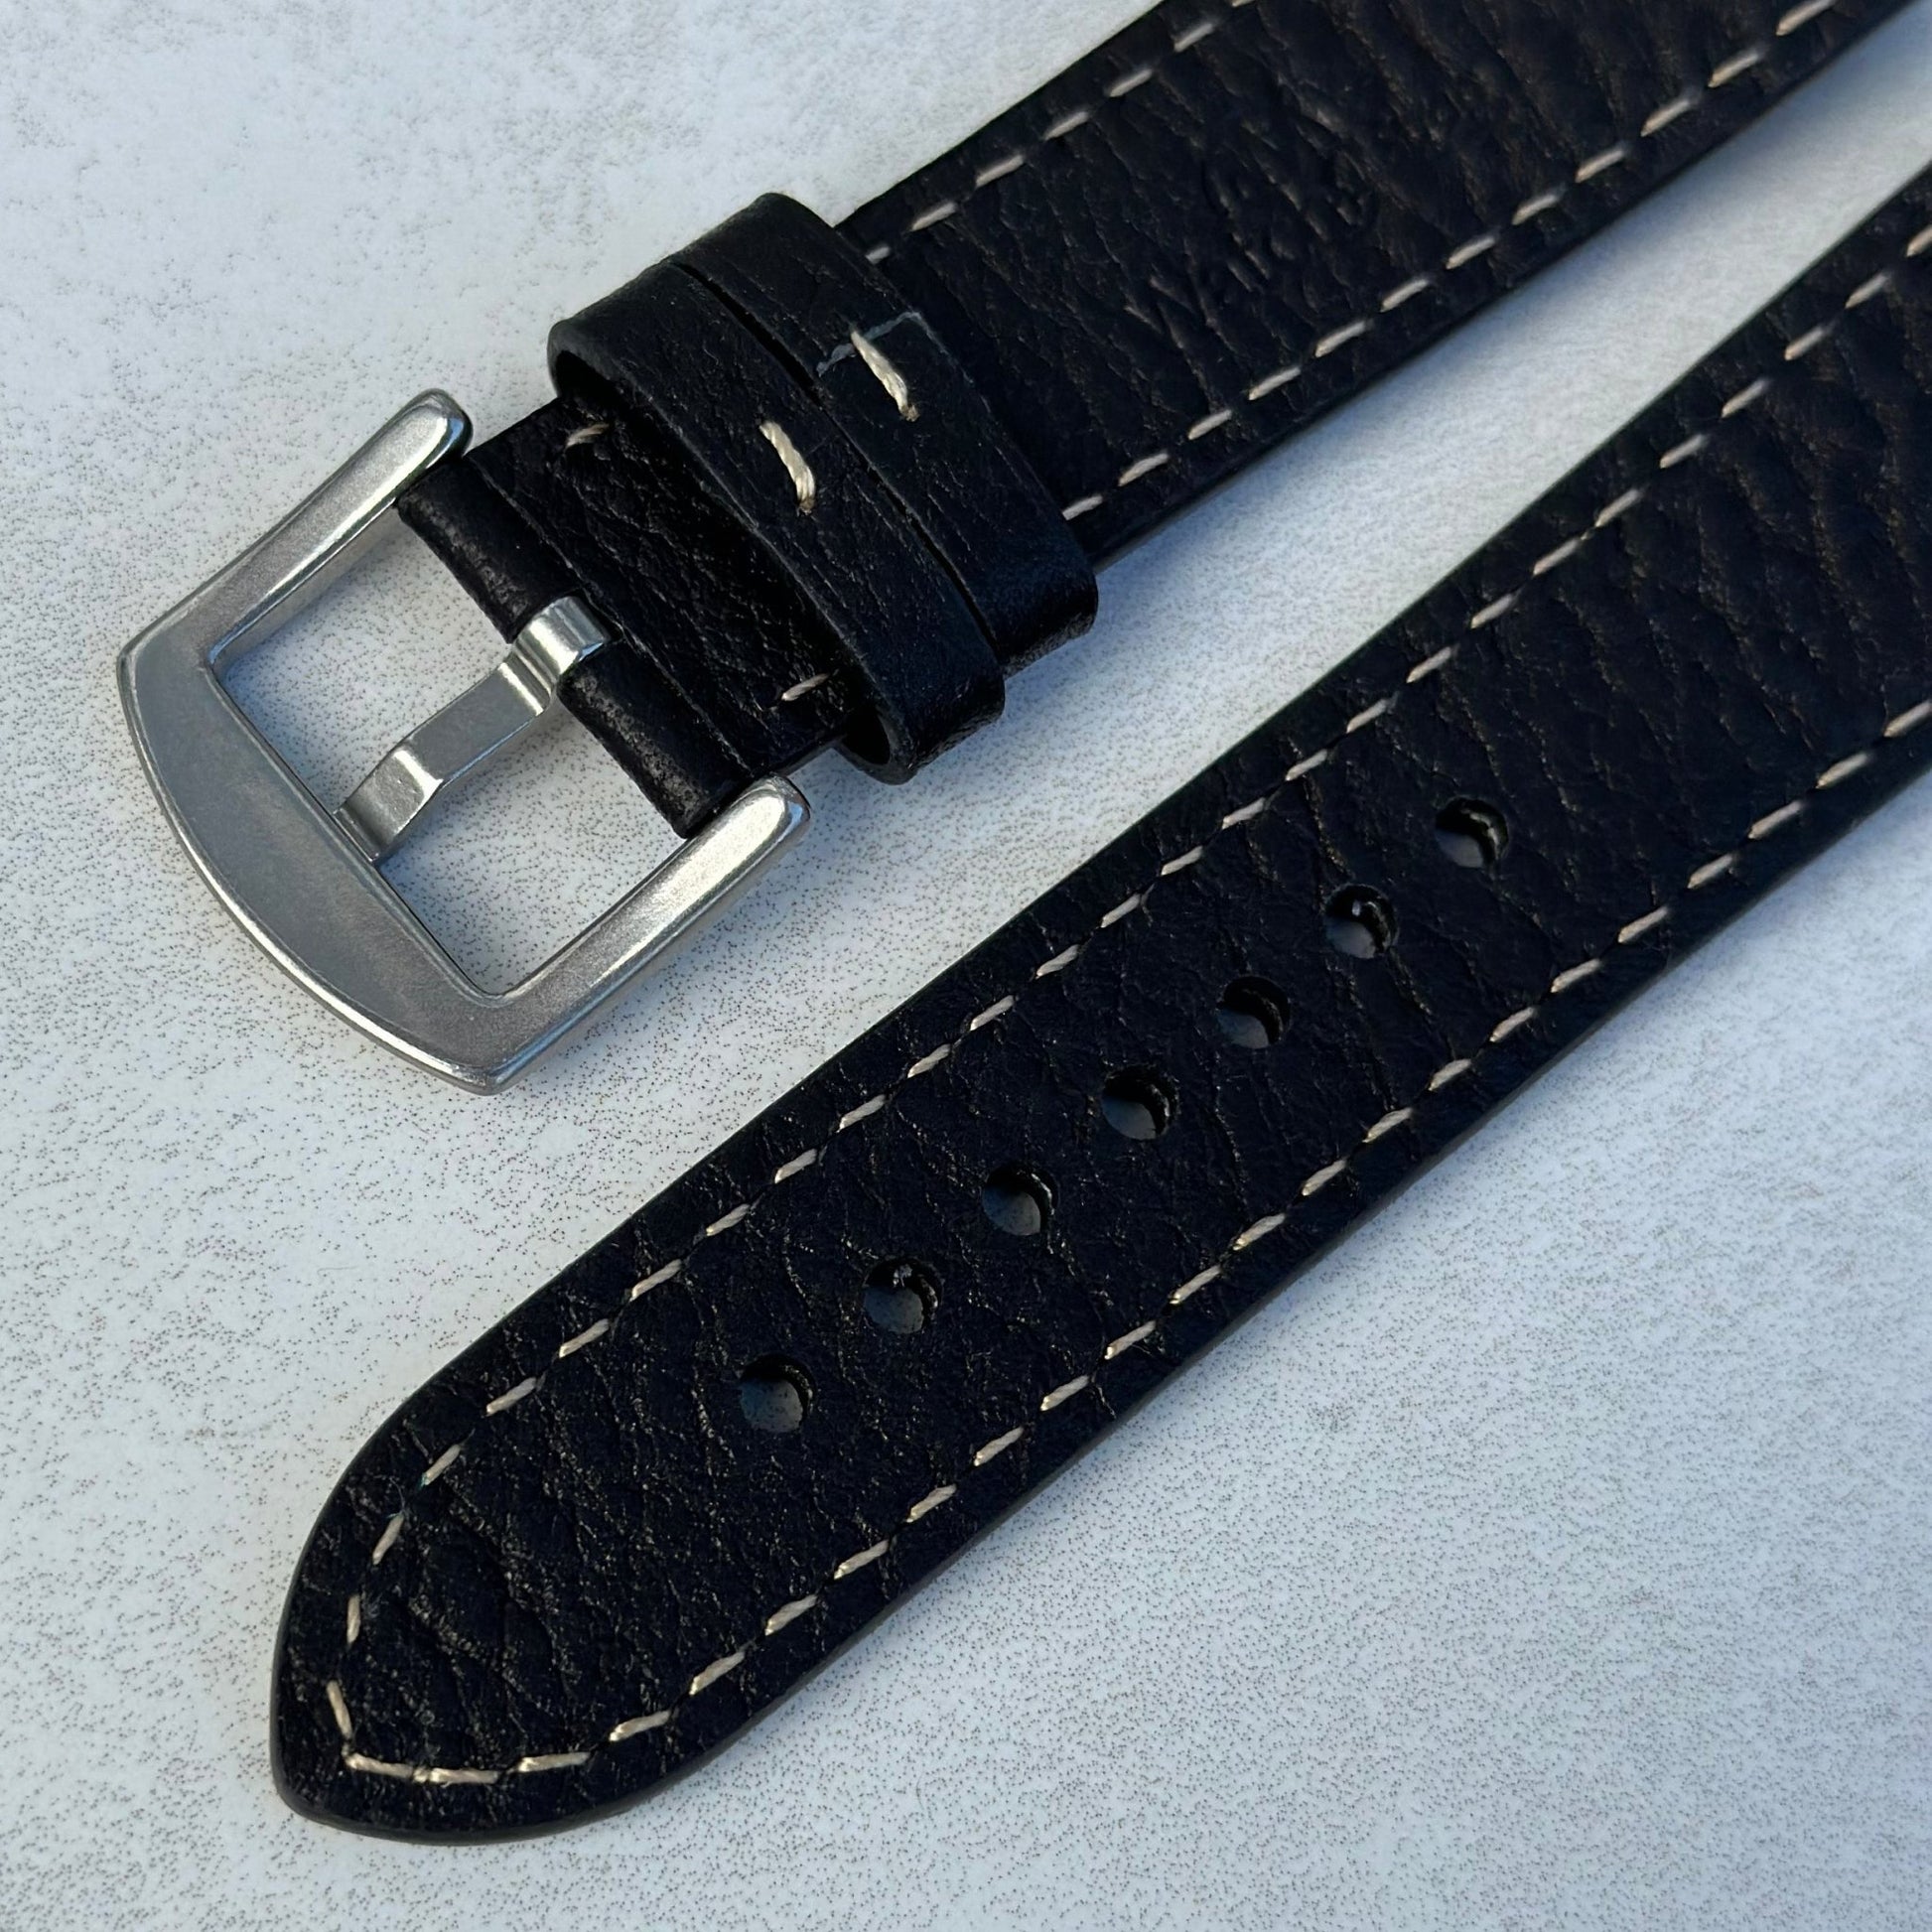 Rear of the brushed 316L stainless steel buckle on the Rome jet black Italian leather watch strap. Watch And Strap